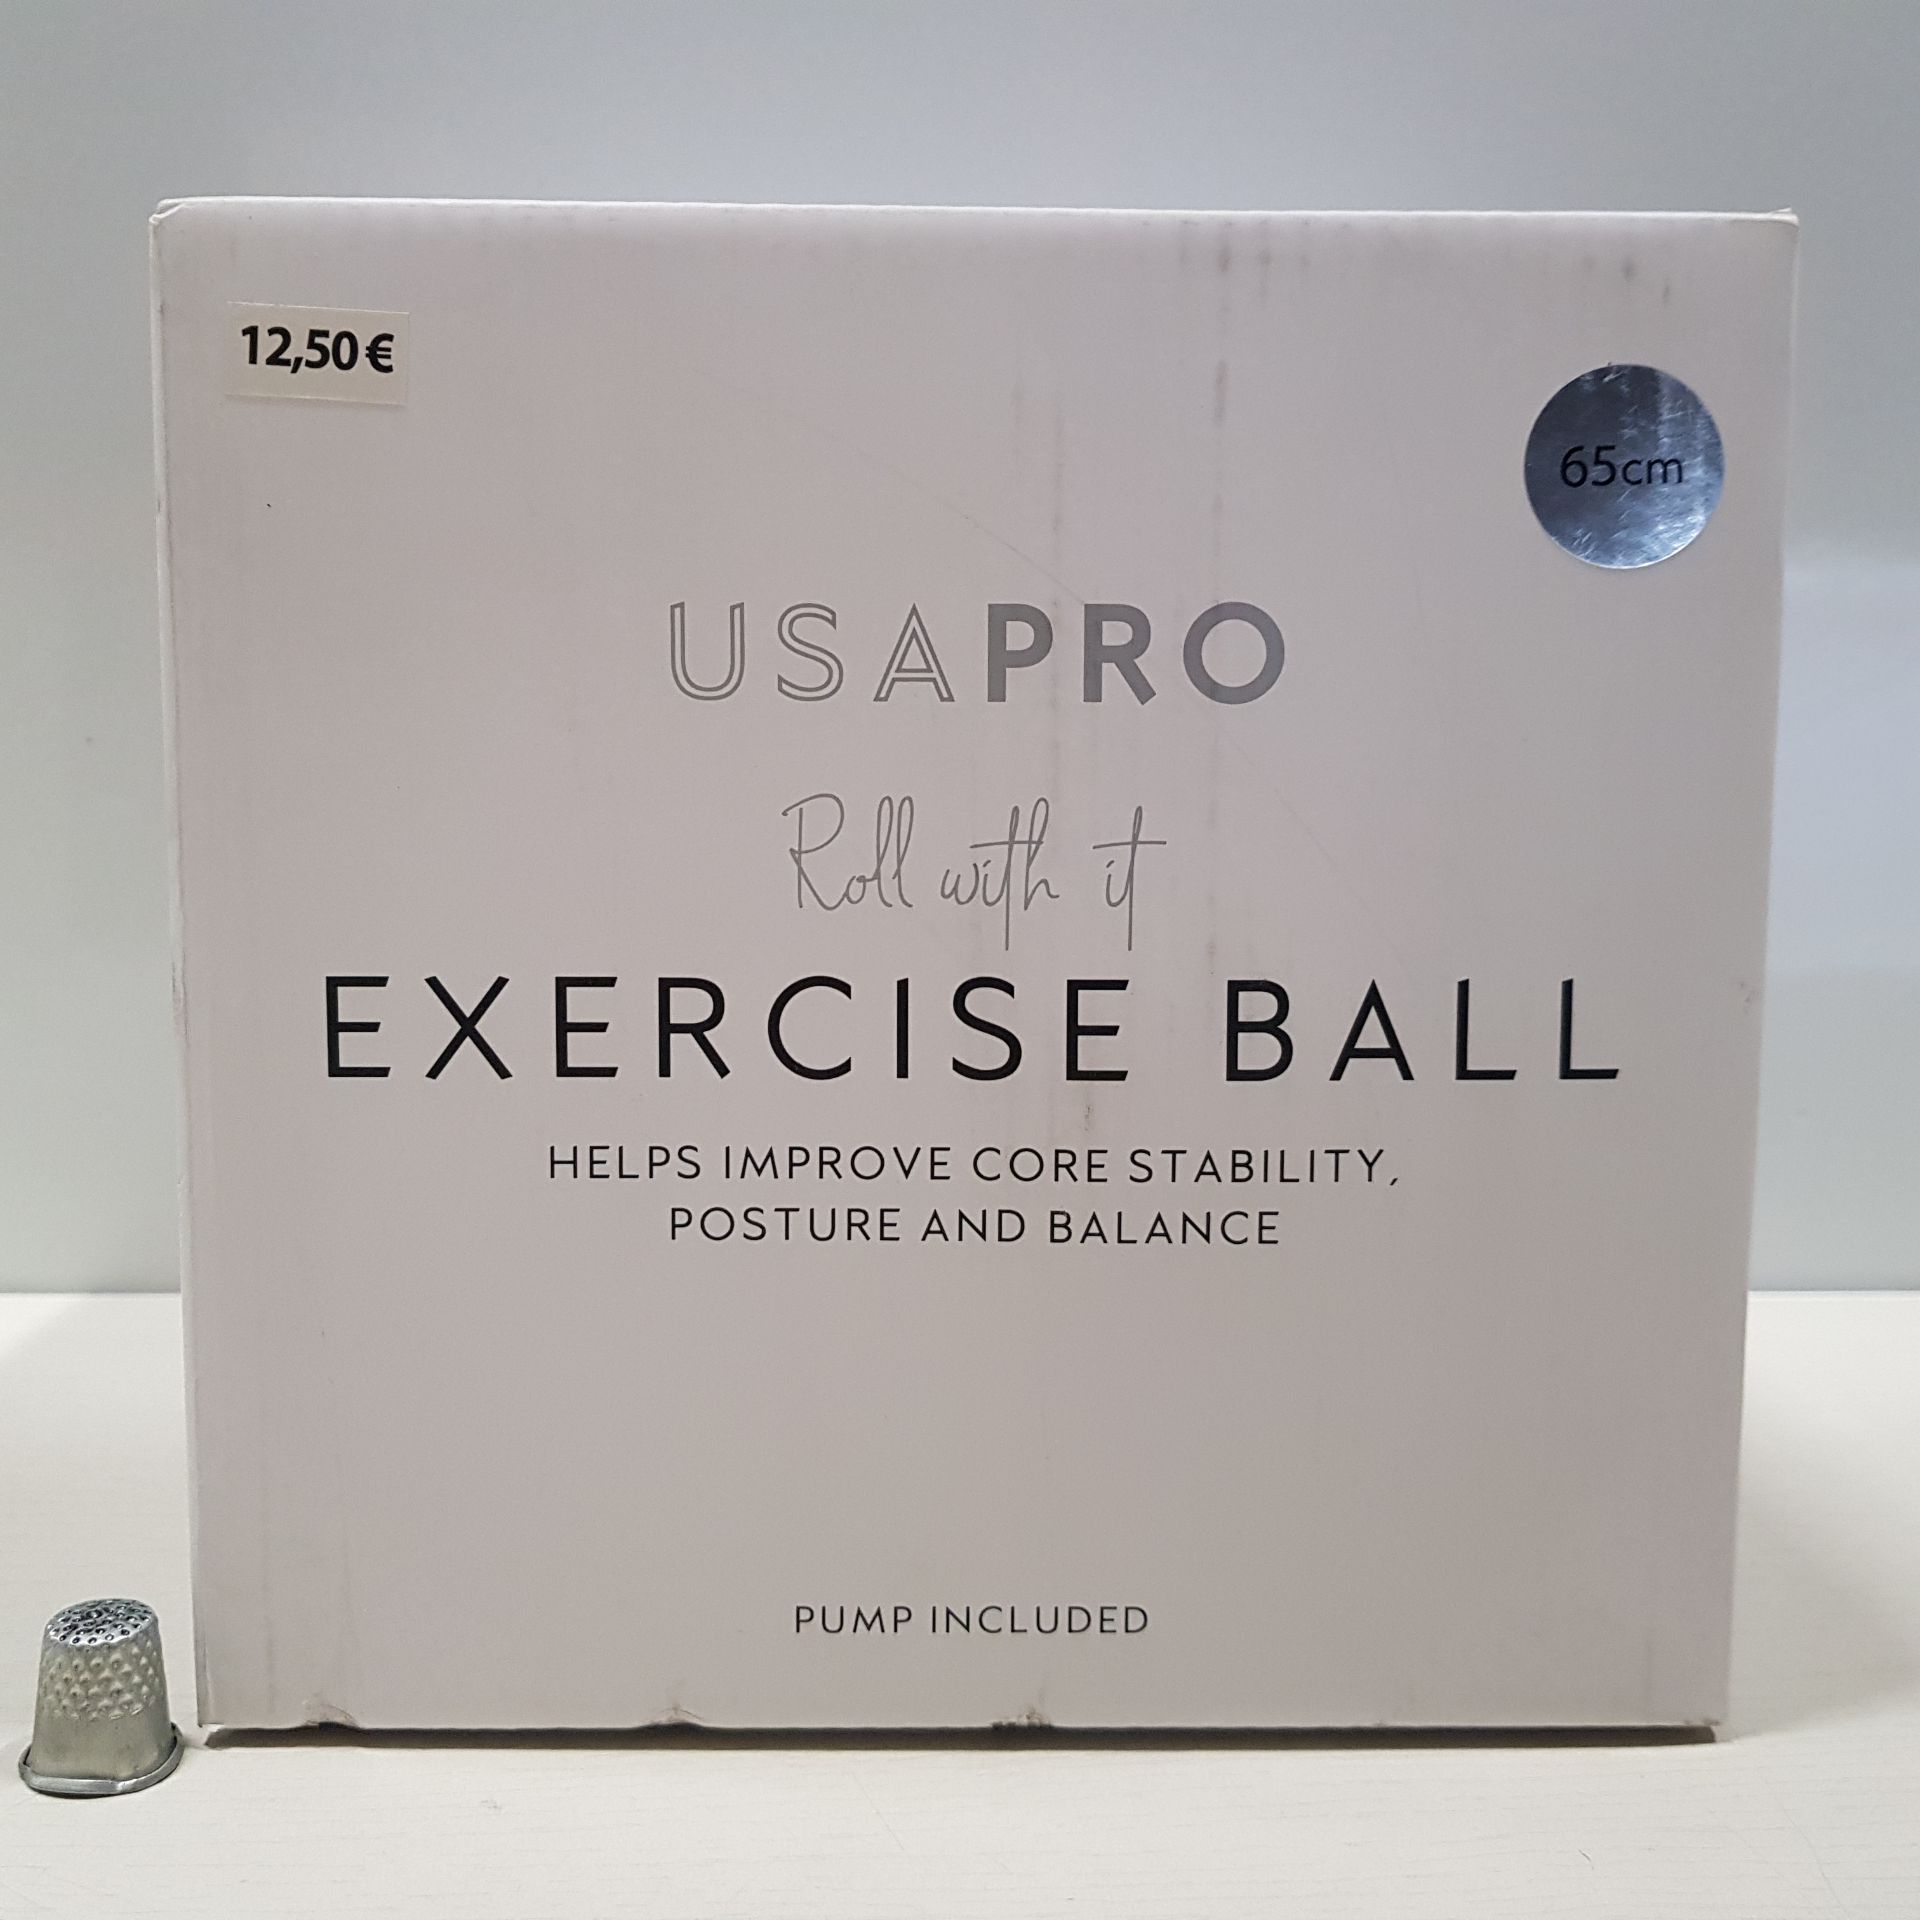 24 X BRAND NEW USA PRO EXERCISE BALL SIZE 65CM WITH PUMP INCLUDED - IN 2 BOXES